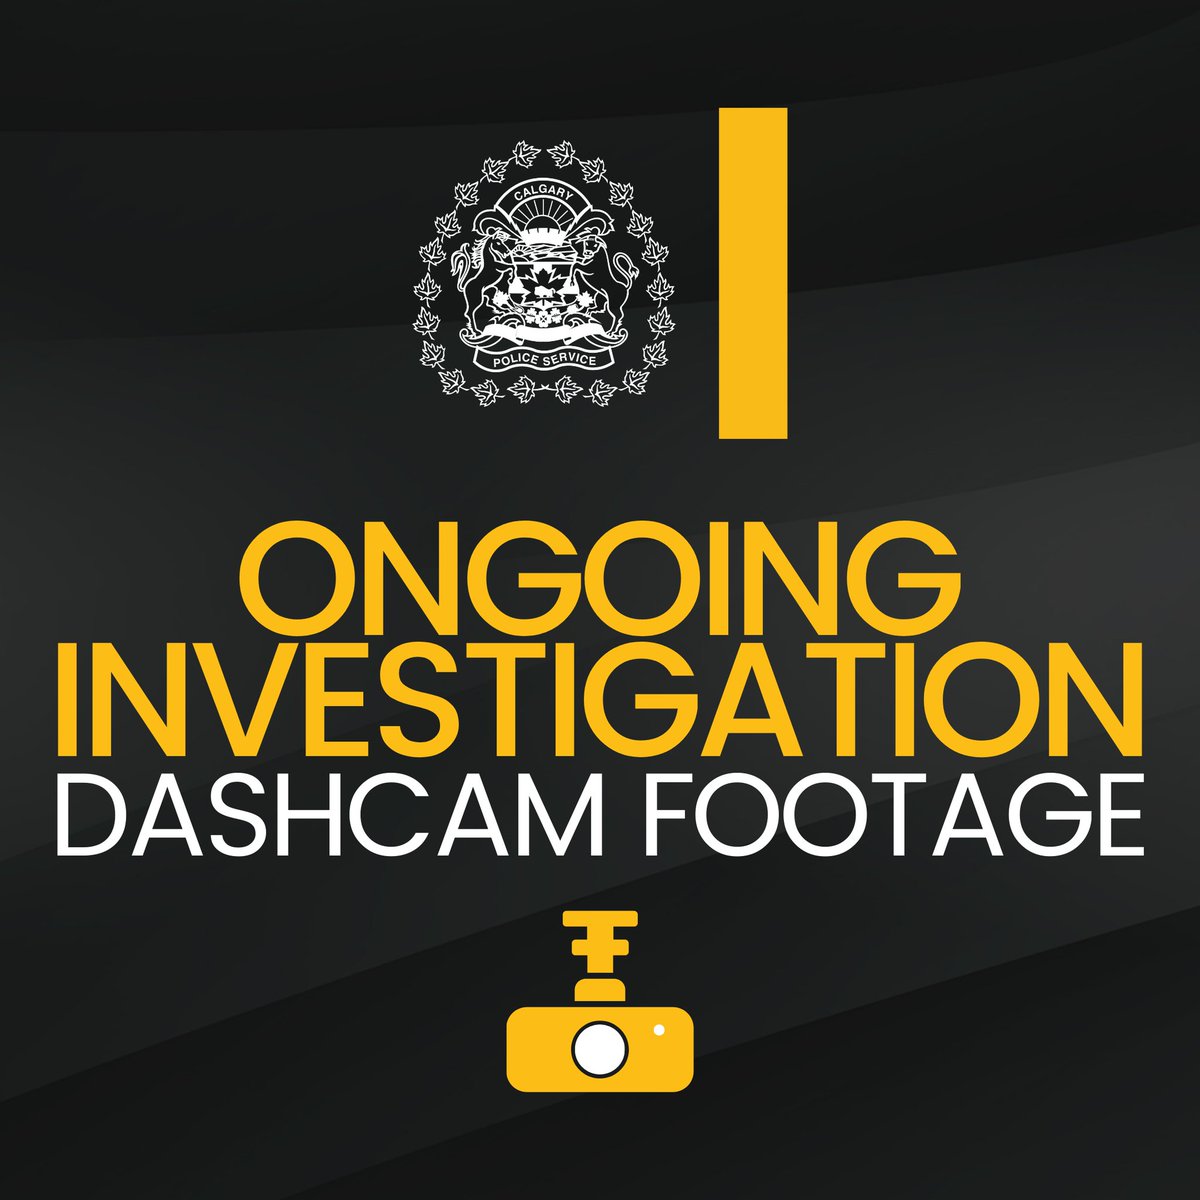 🔵 ONGOING INVESTIGATION 🔵 Investigators are looking to speak with witnesses or anyone with dashcam footage related to a fatal collision that occurred between a pedestrian & a vehicle on the Centre Street Bridge at approx. 2:15 a.m. today. 📌 It is believed a woman in her